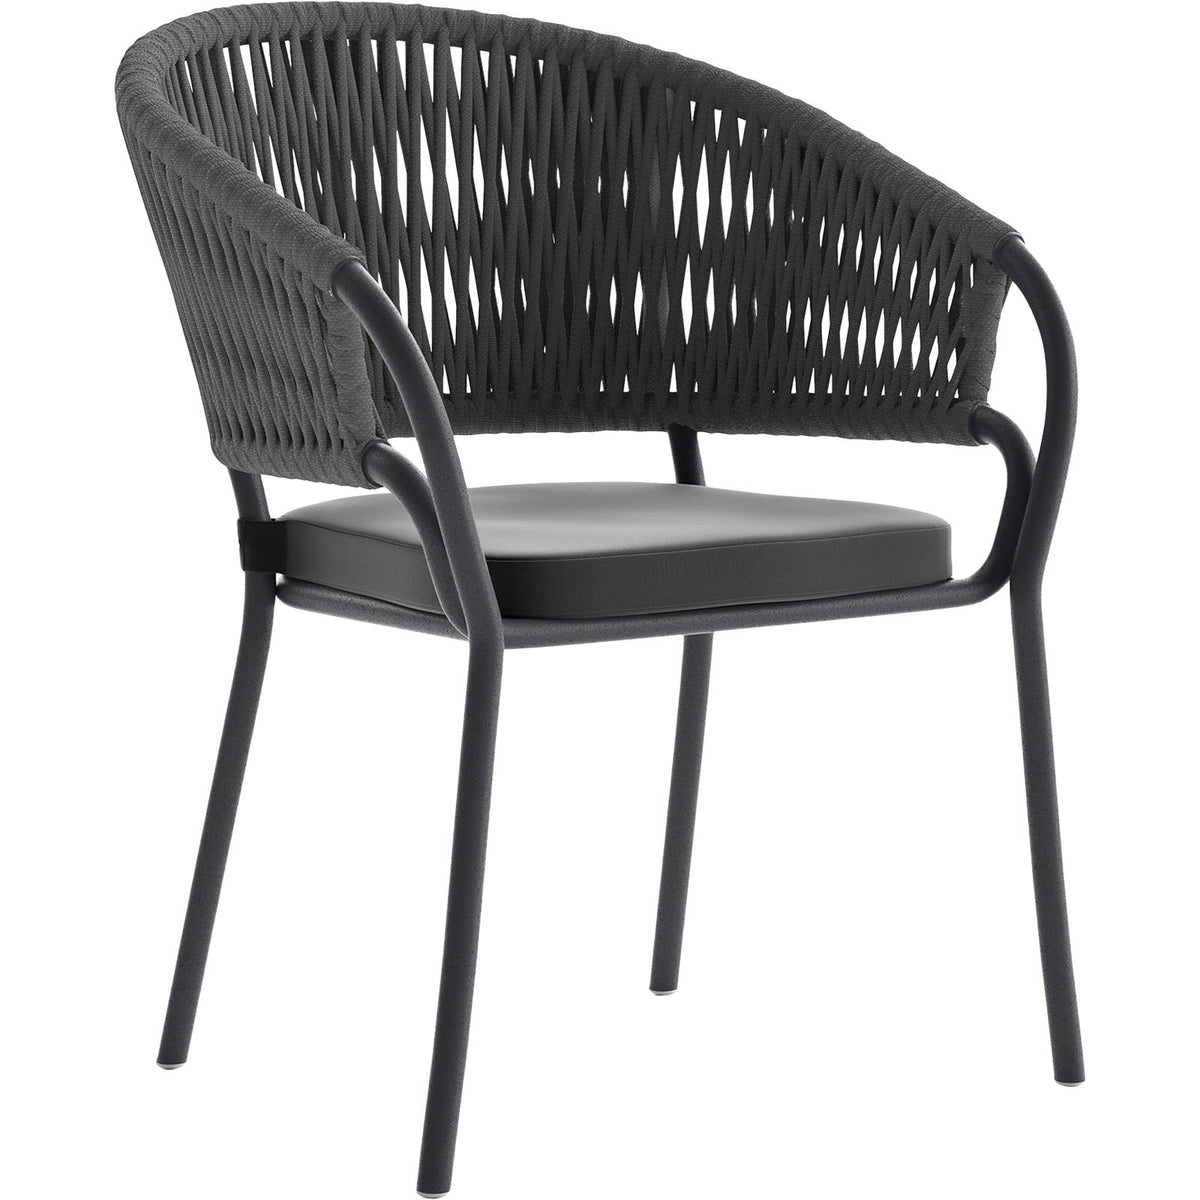 Pleasure Outdoor Dining Chair